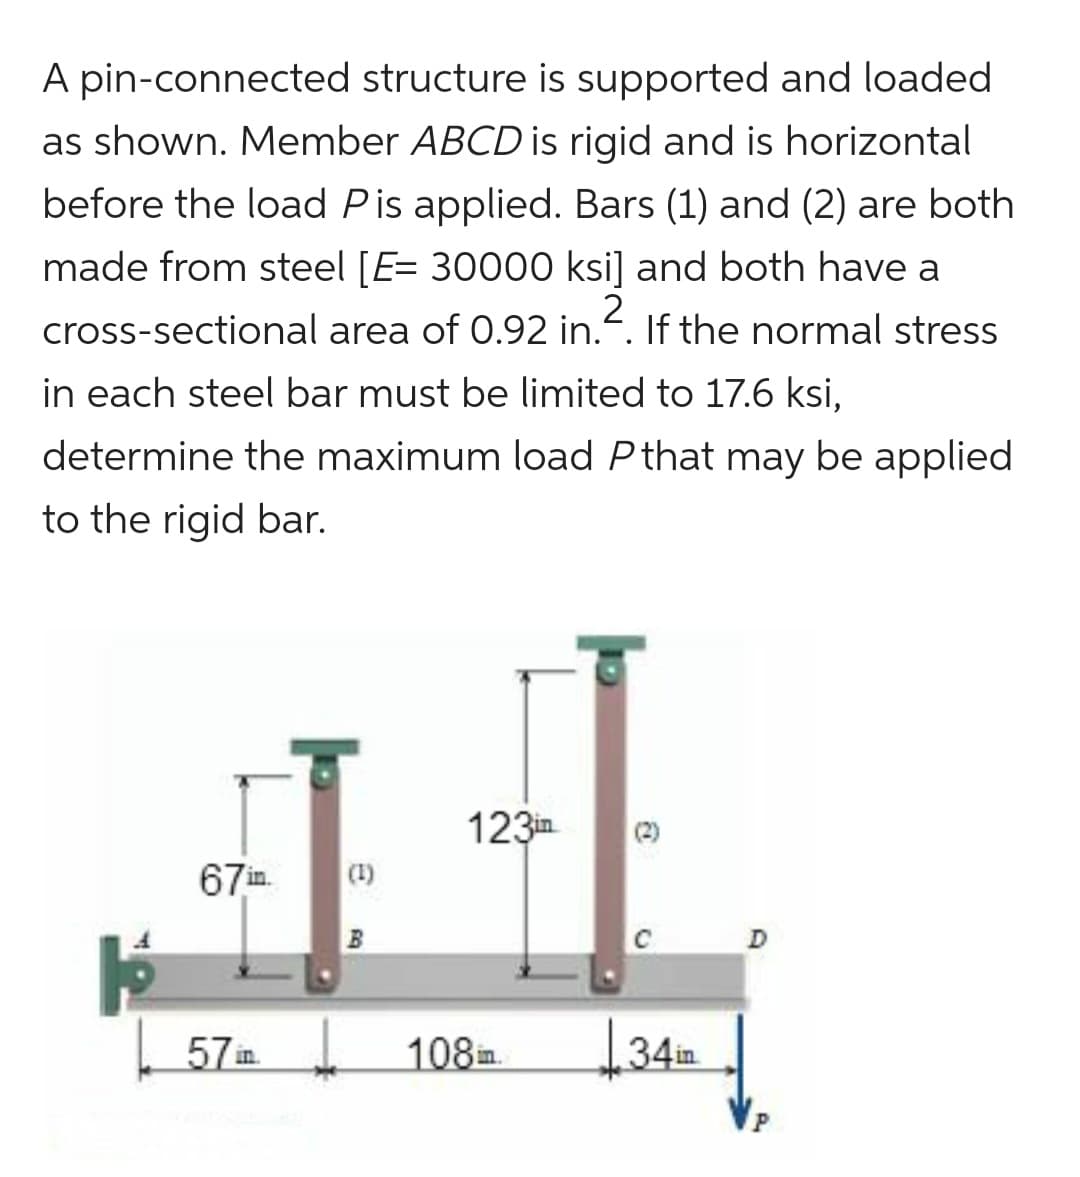 A pin-connected structure is supported and loaded
as shown. Member ABCD is rigid and is horizontal
before the load Pis applied. Bars (1) and (2) are both
made from steel [E= 30000 ksi] and both have a
2
cross-sectional area of 0.92 in.. If the normal stress
in each steel bar must be limited to 17.6 ksi,
determine the maximum load P that may be applied
to the rigid bar.
67in.
57in.
123in
108in.
34in
D